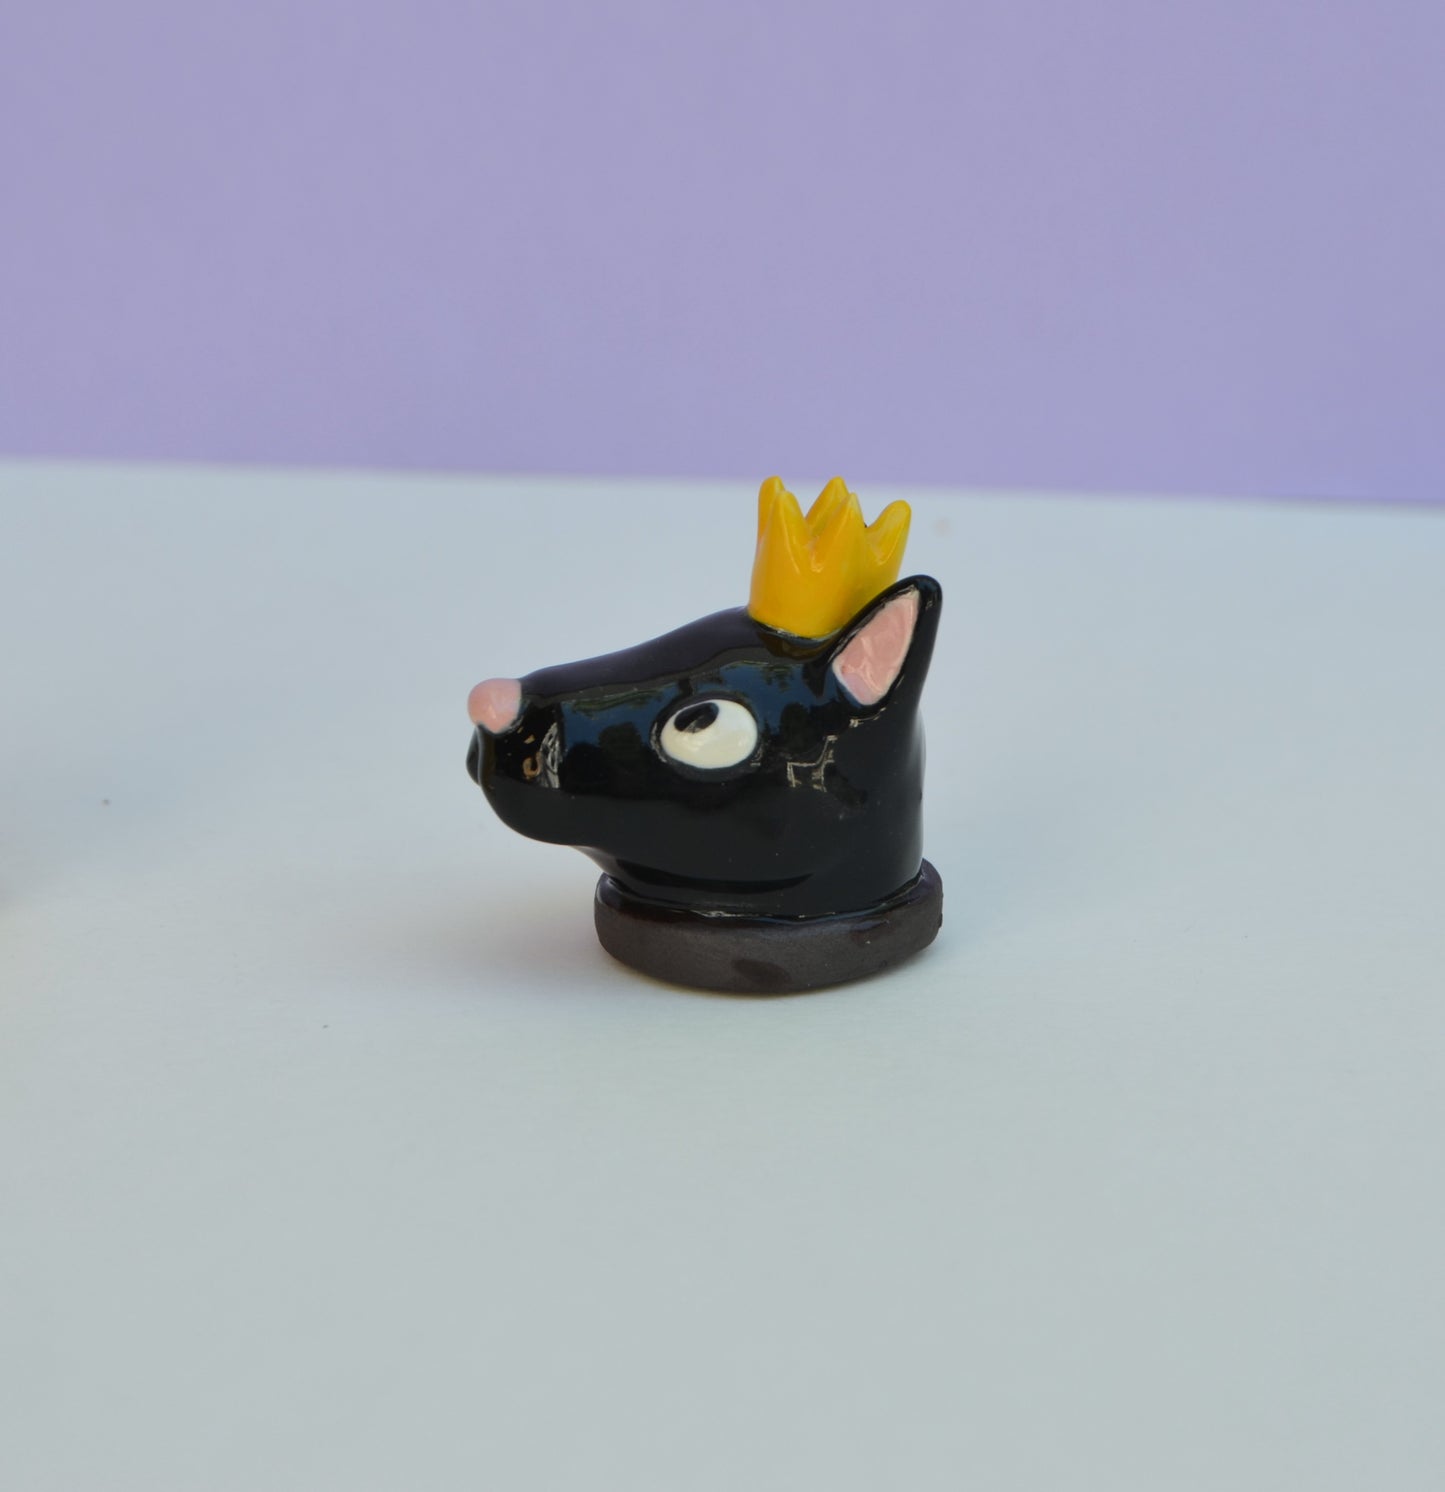 Ceramic Mini Dog Bust with Cowboy Hat or Crown